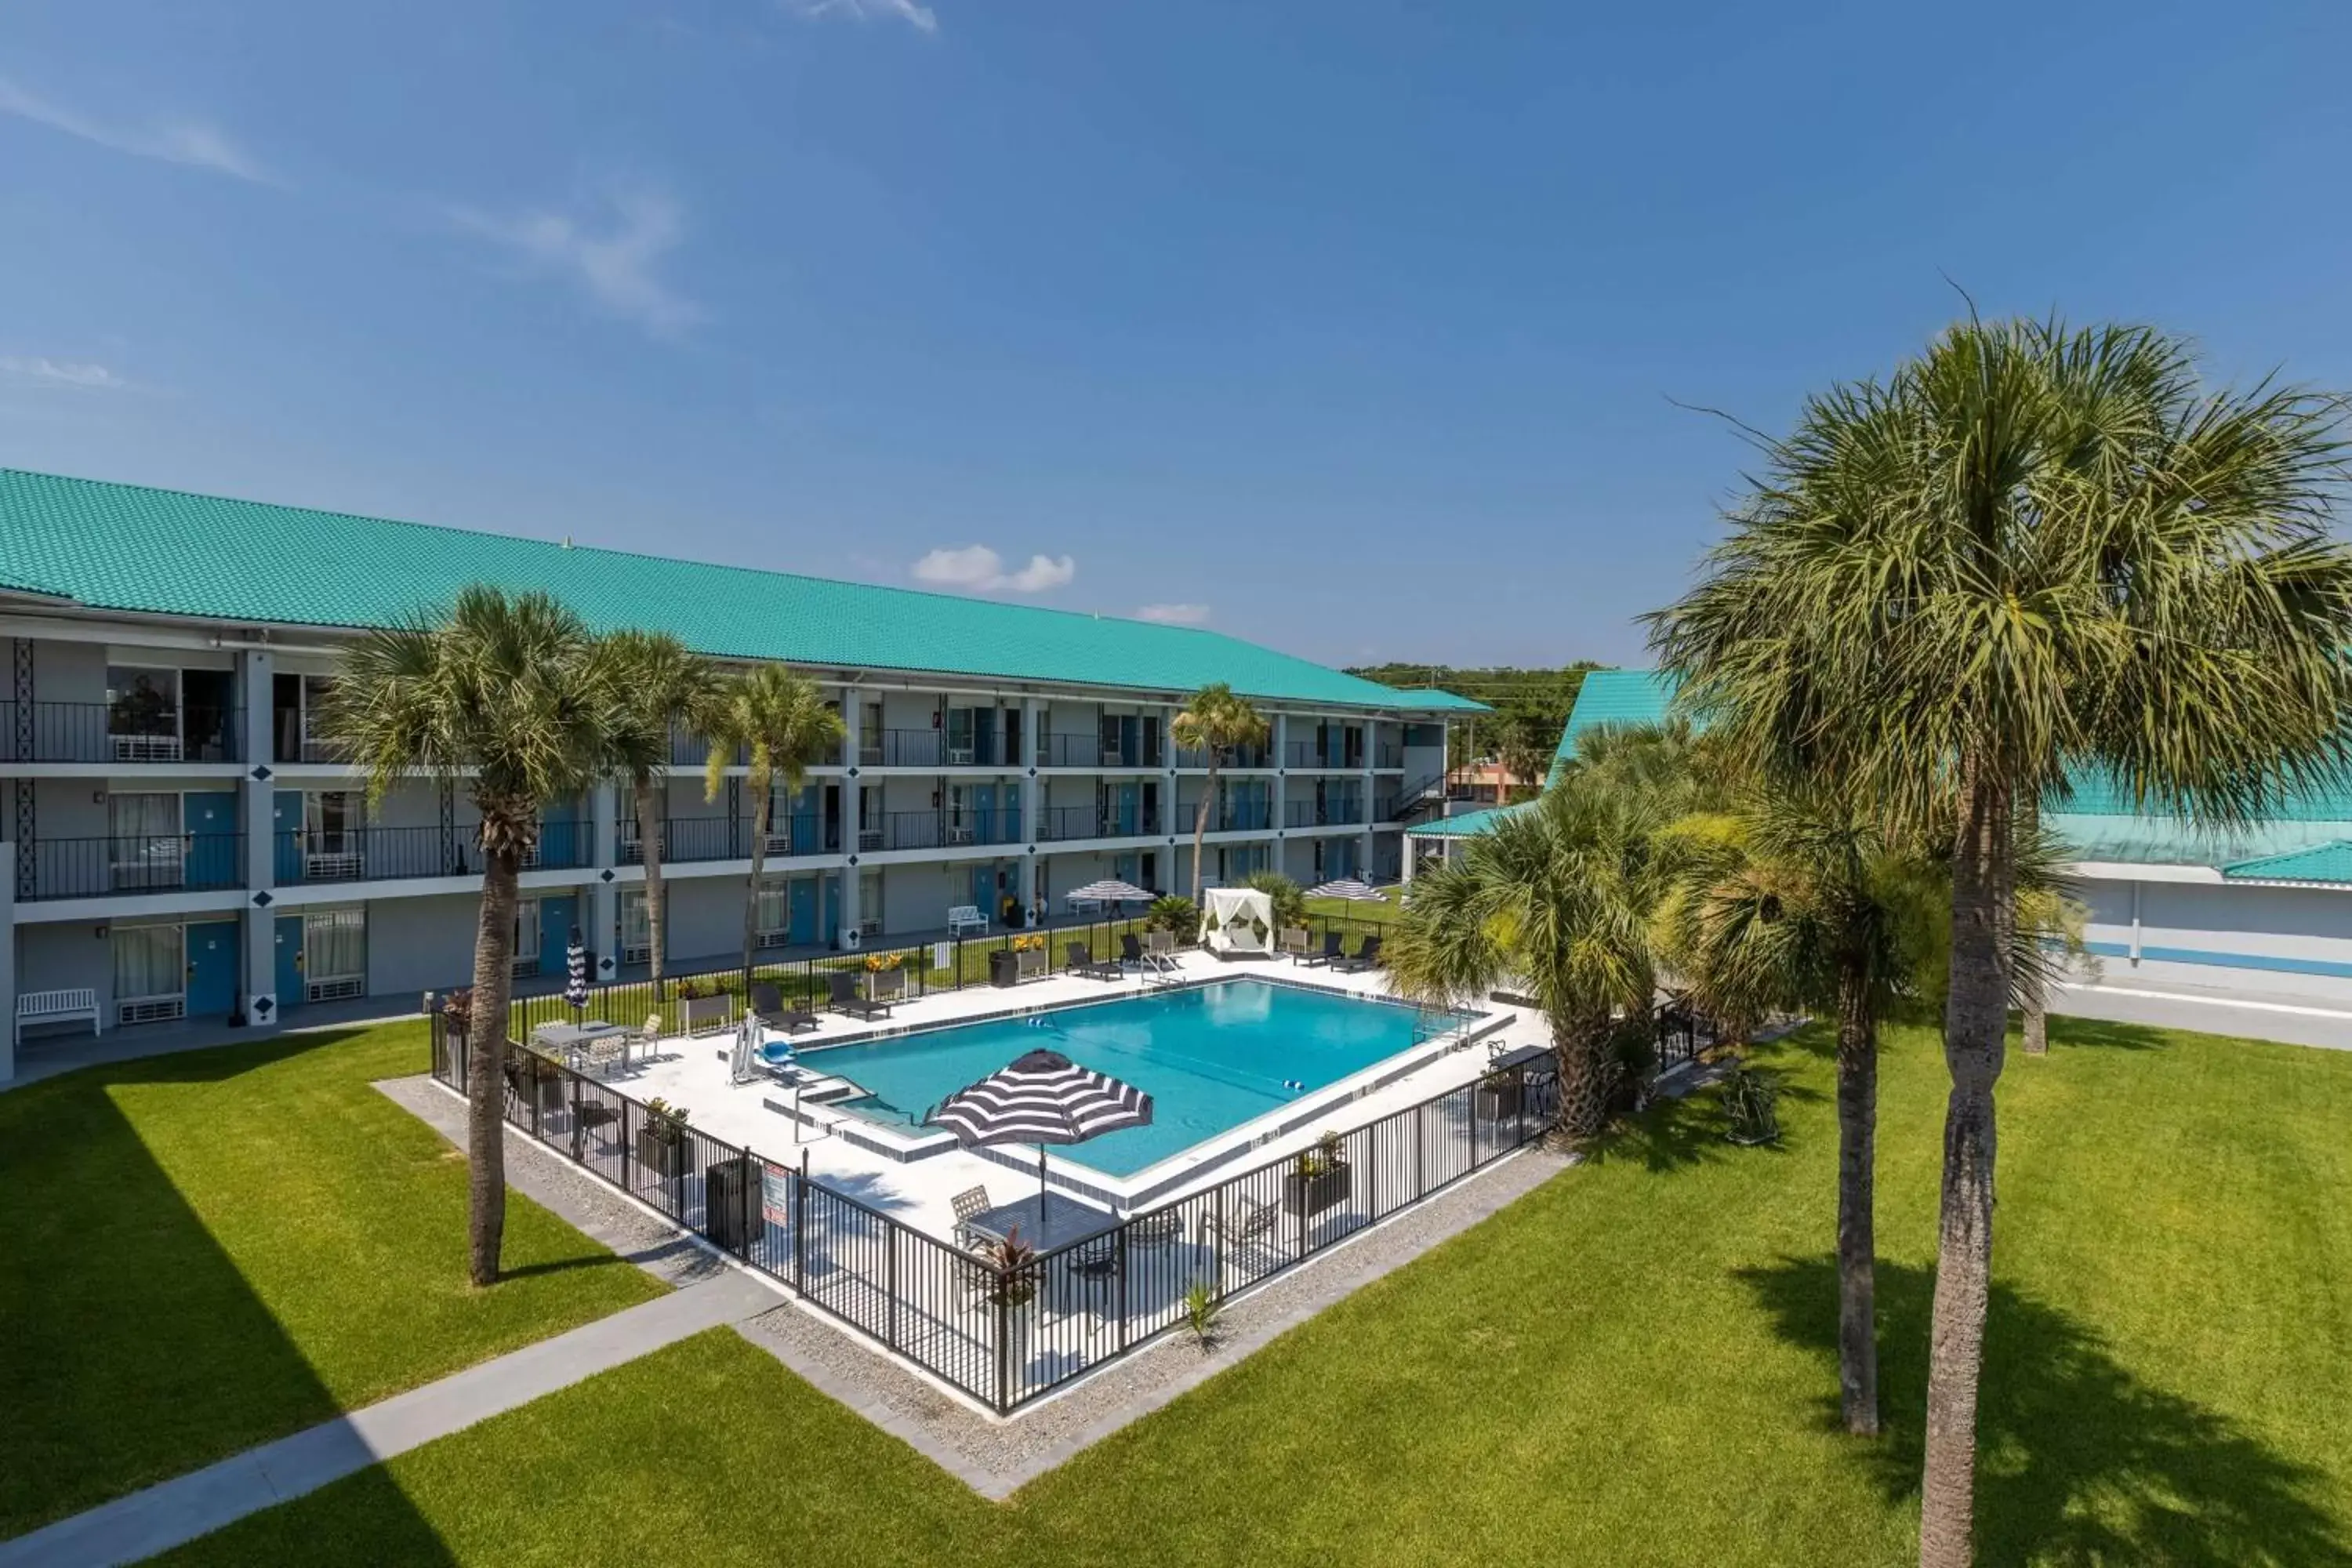 Property building, Pool View in Baymont by Wyndham Altamonte Springs